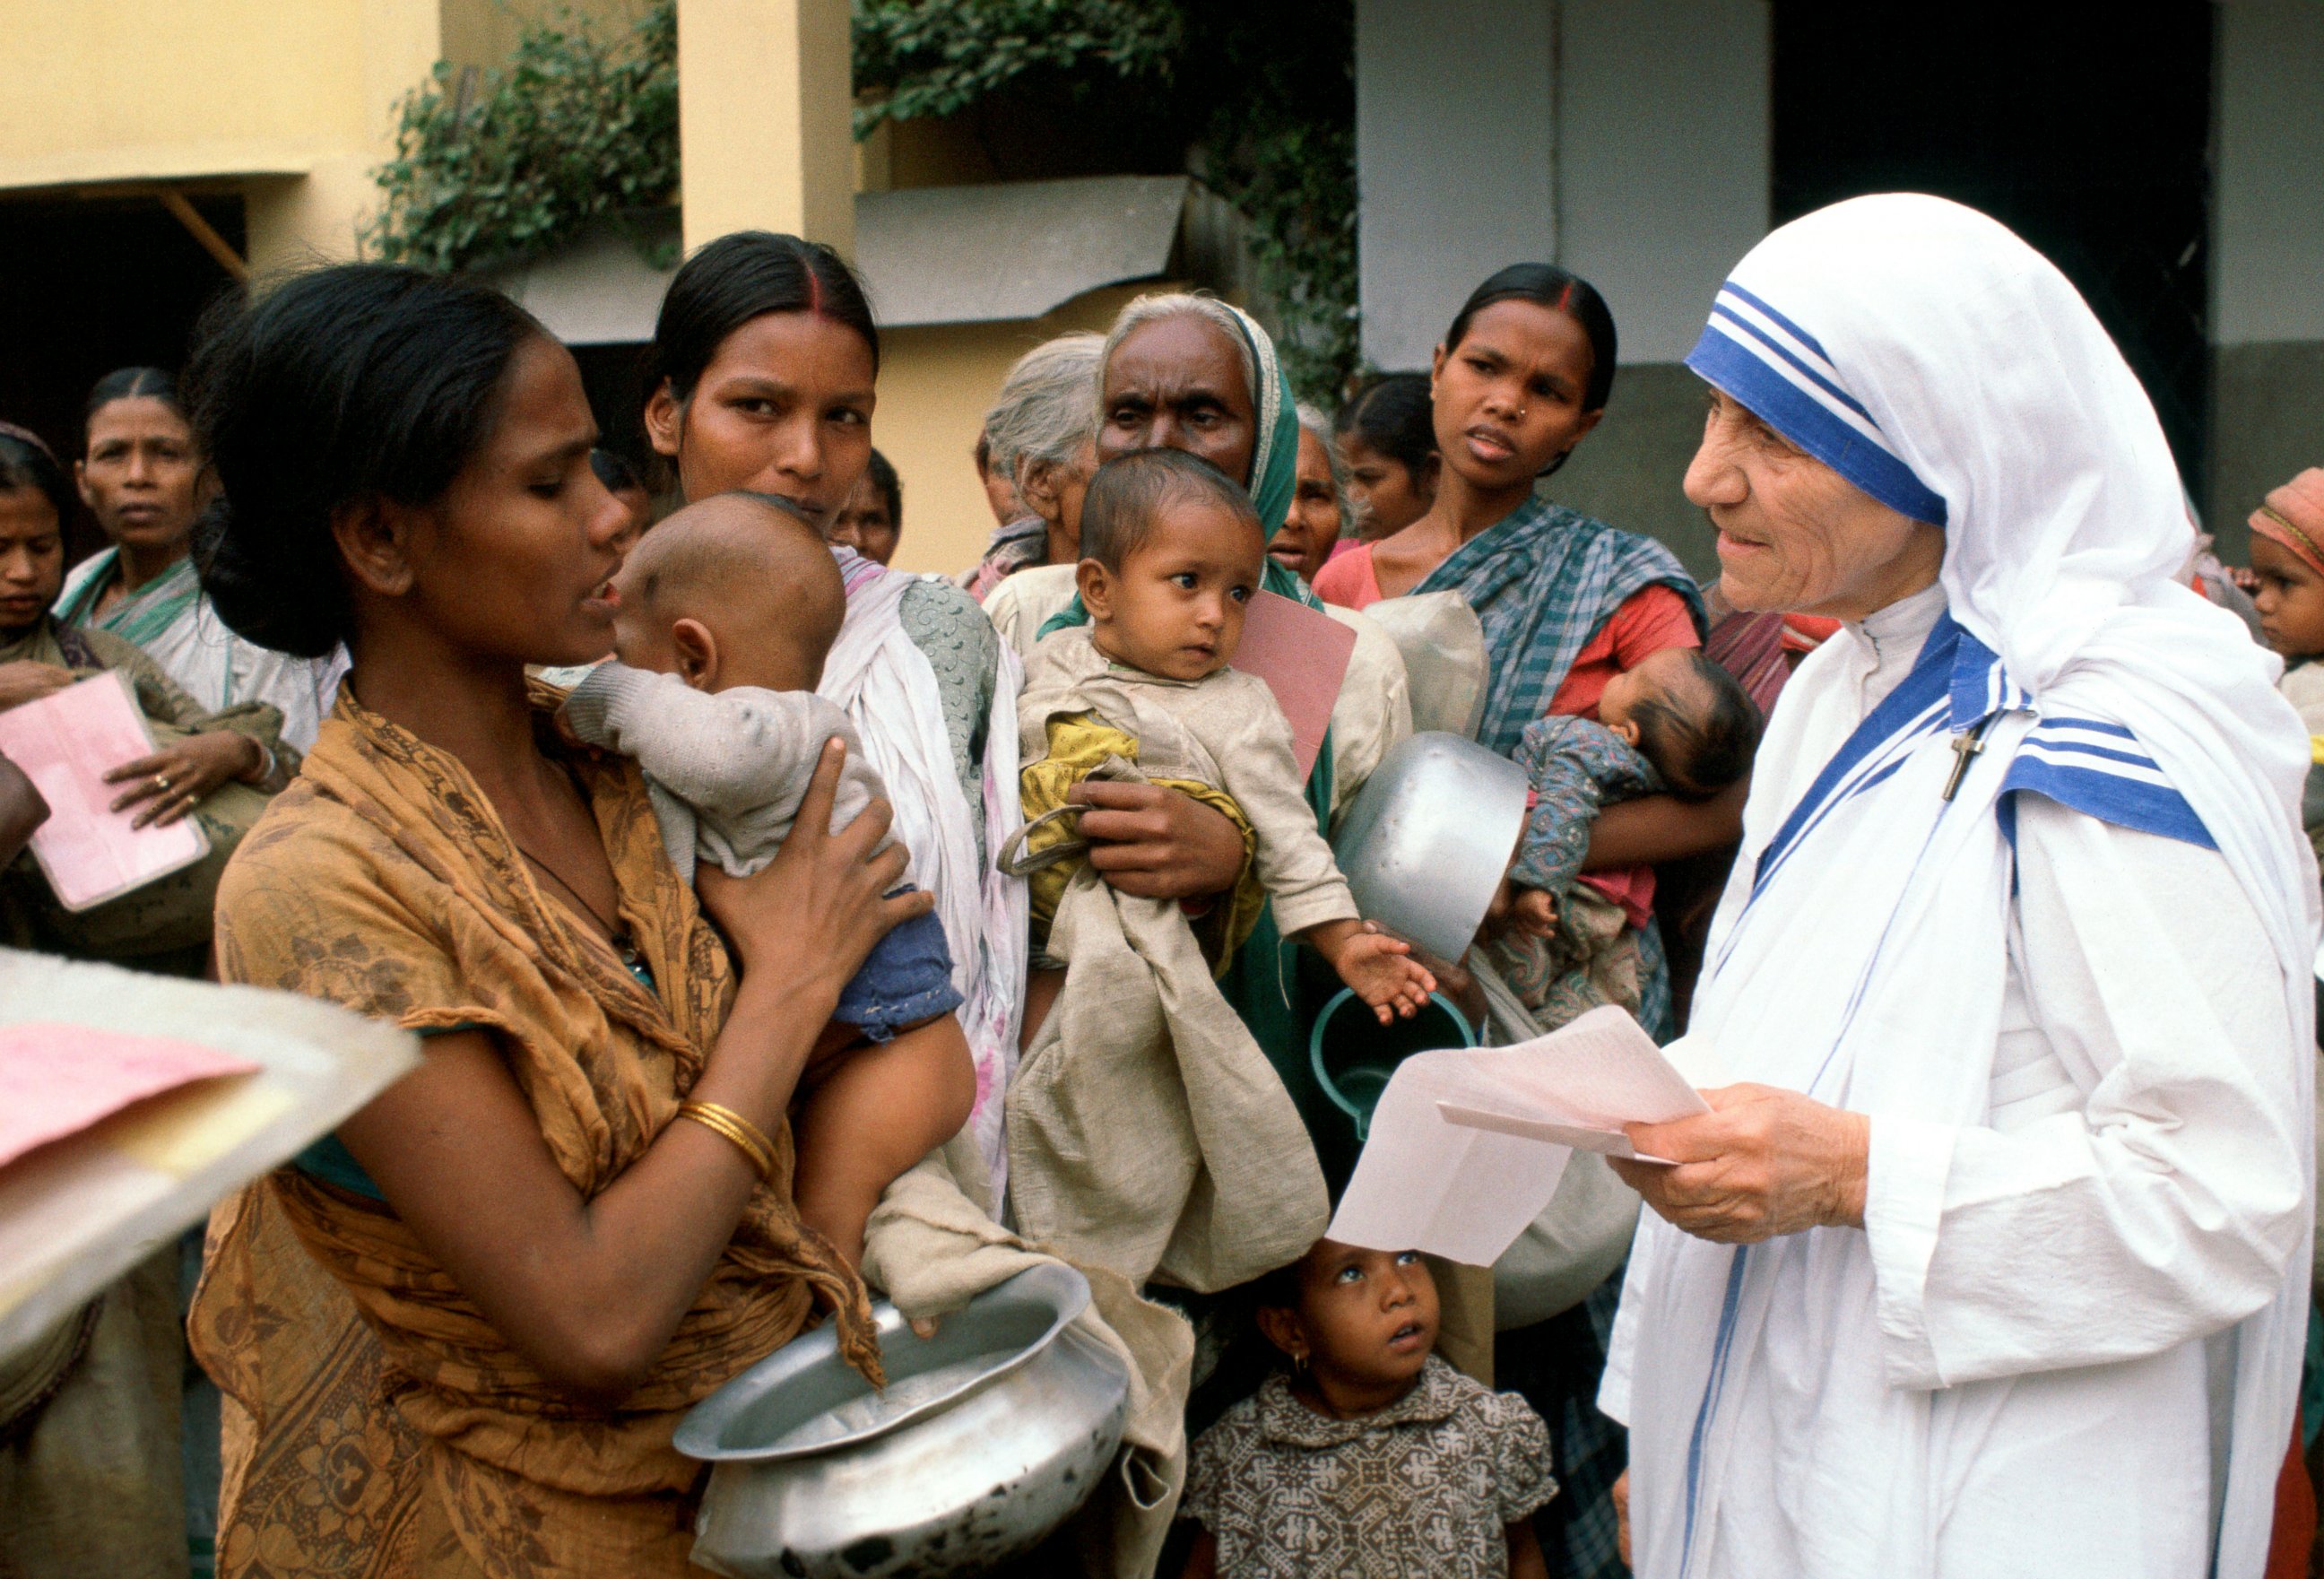 PHOTO: Mother Teresa with mothers and children at her Mission in Calcutta, India.